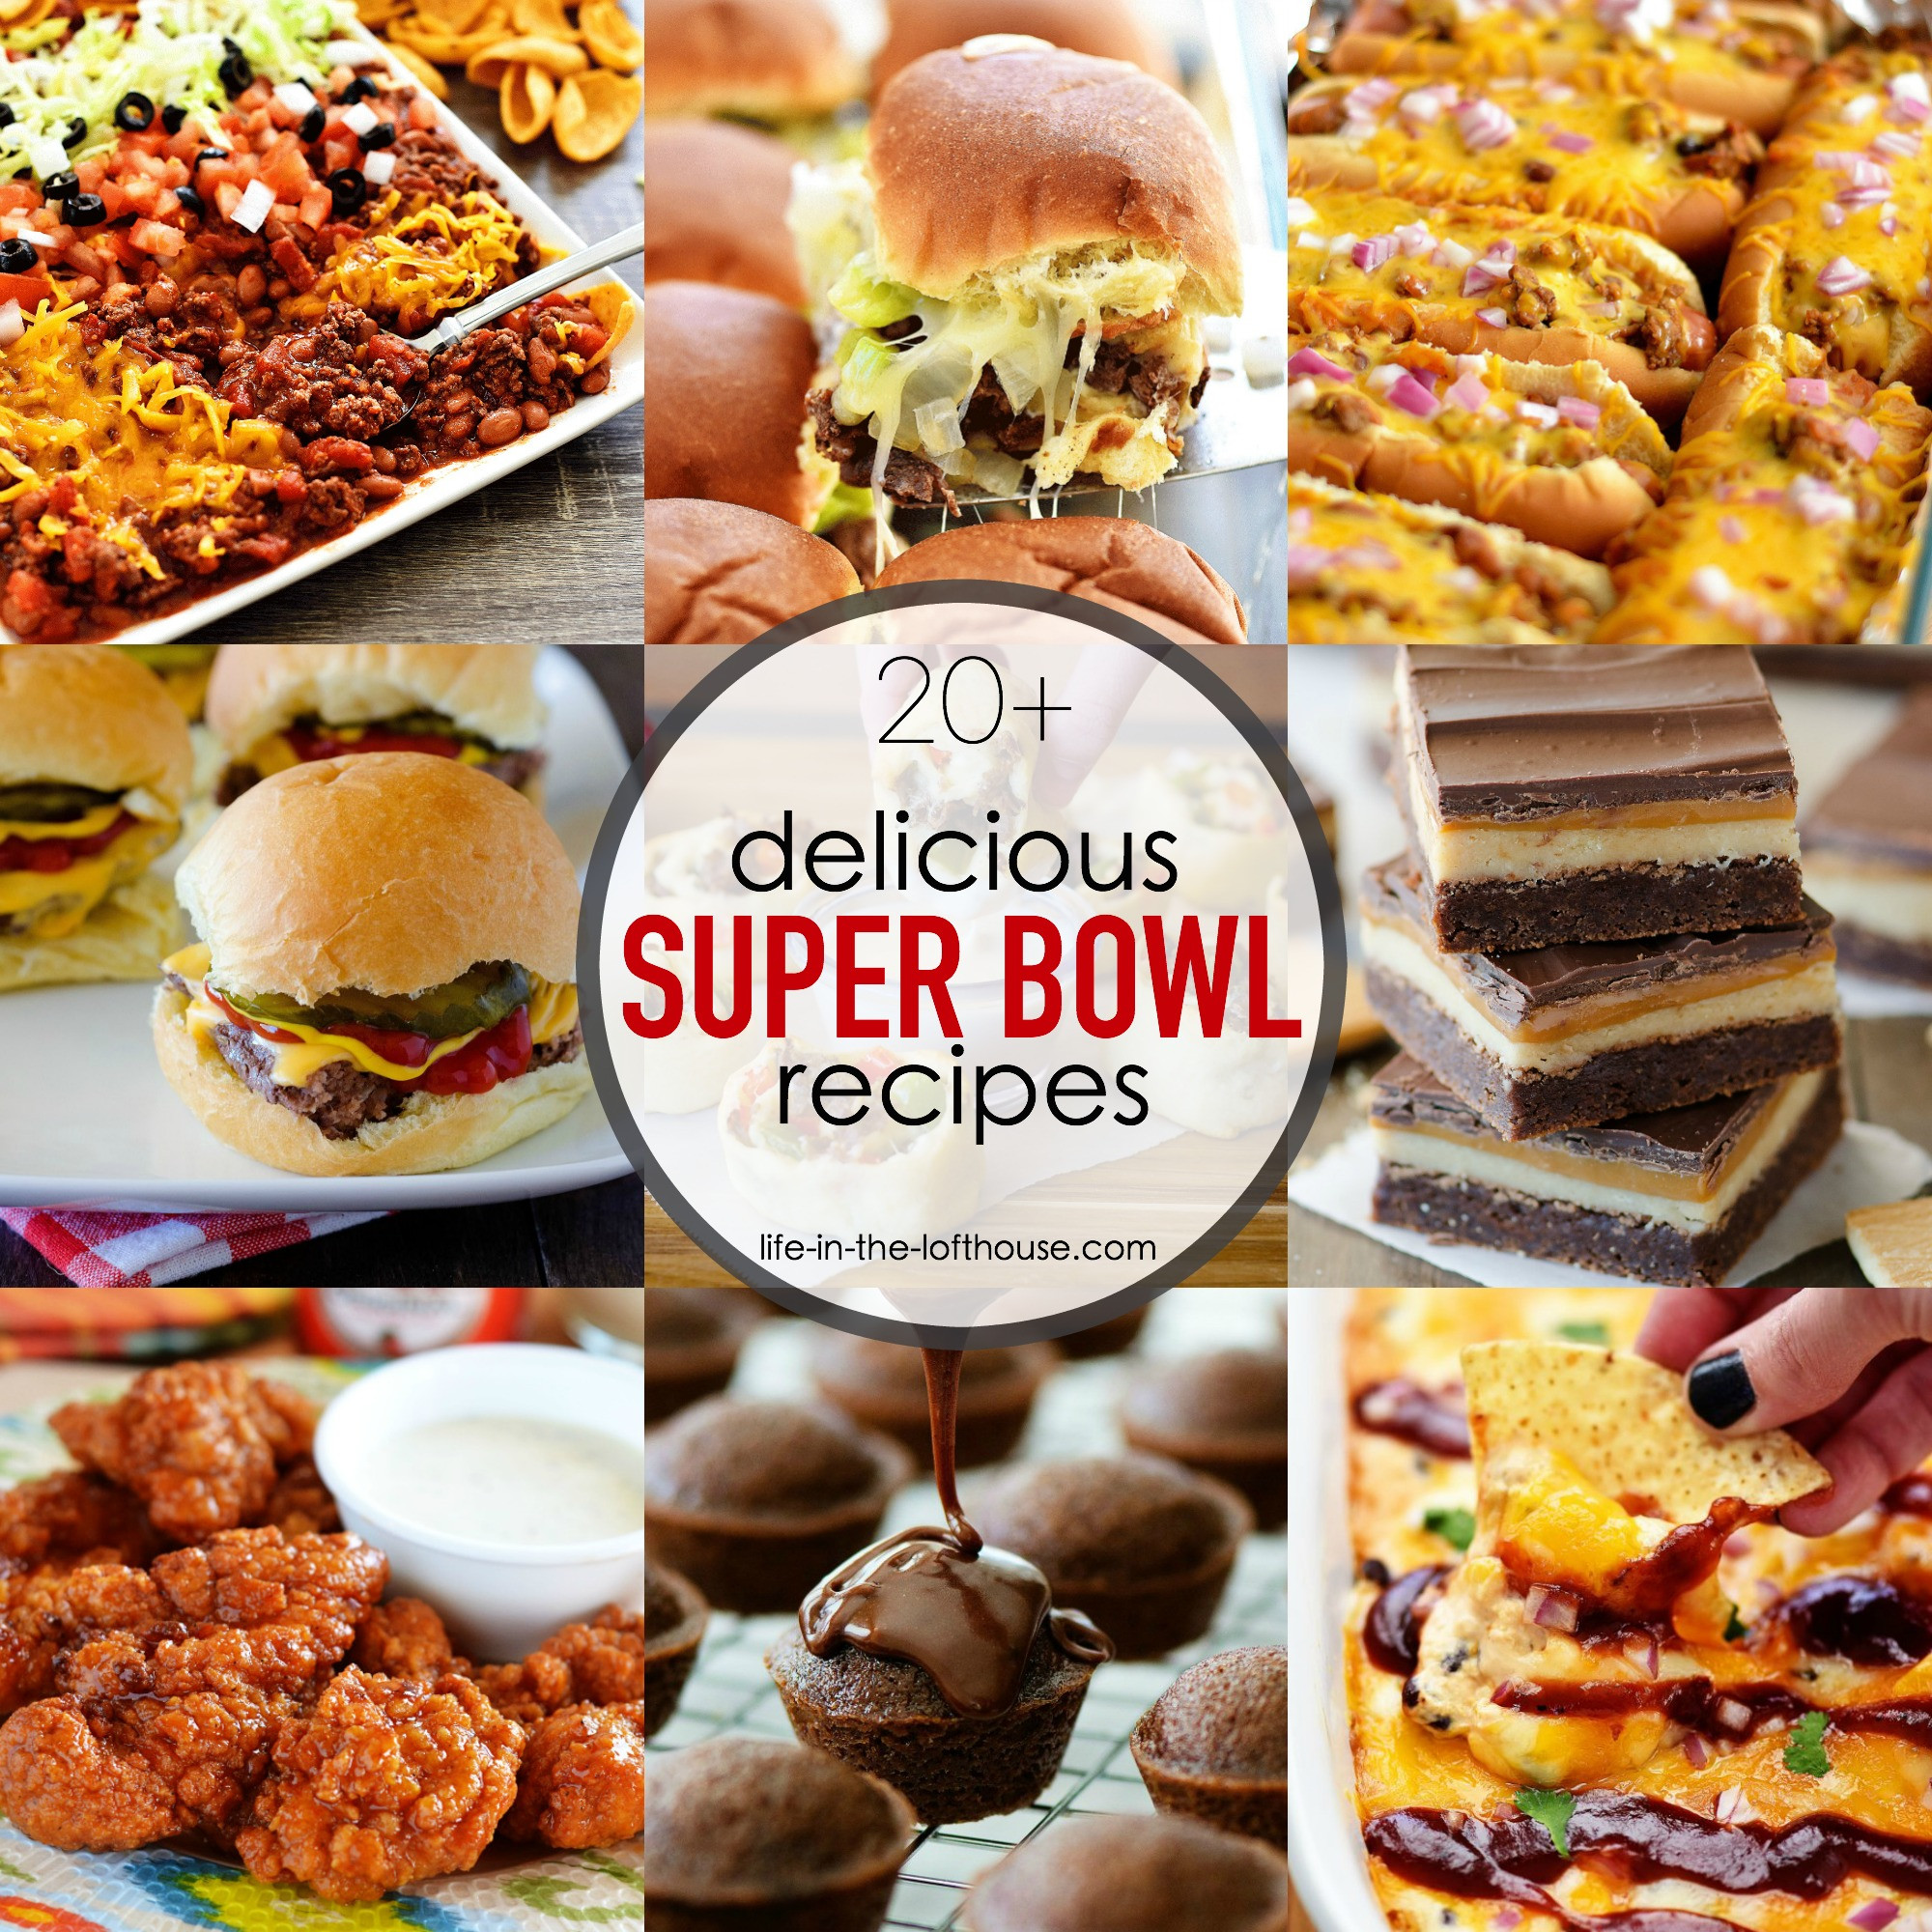 Recipes For Super Bowl Sunday
 20 Super Bowl Recipes Life In The Lofthouse